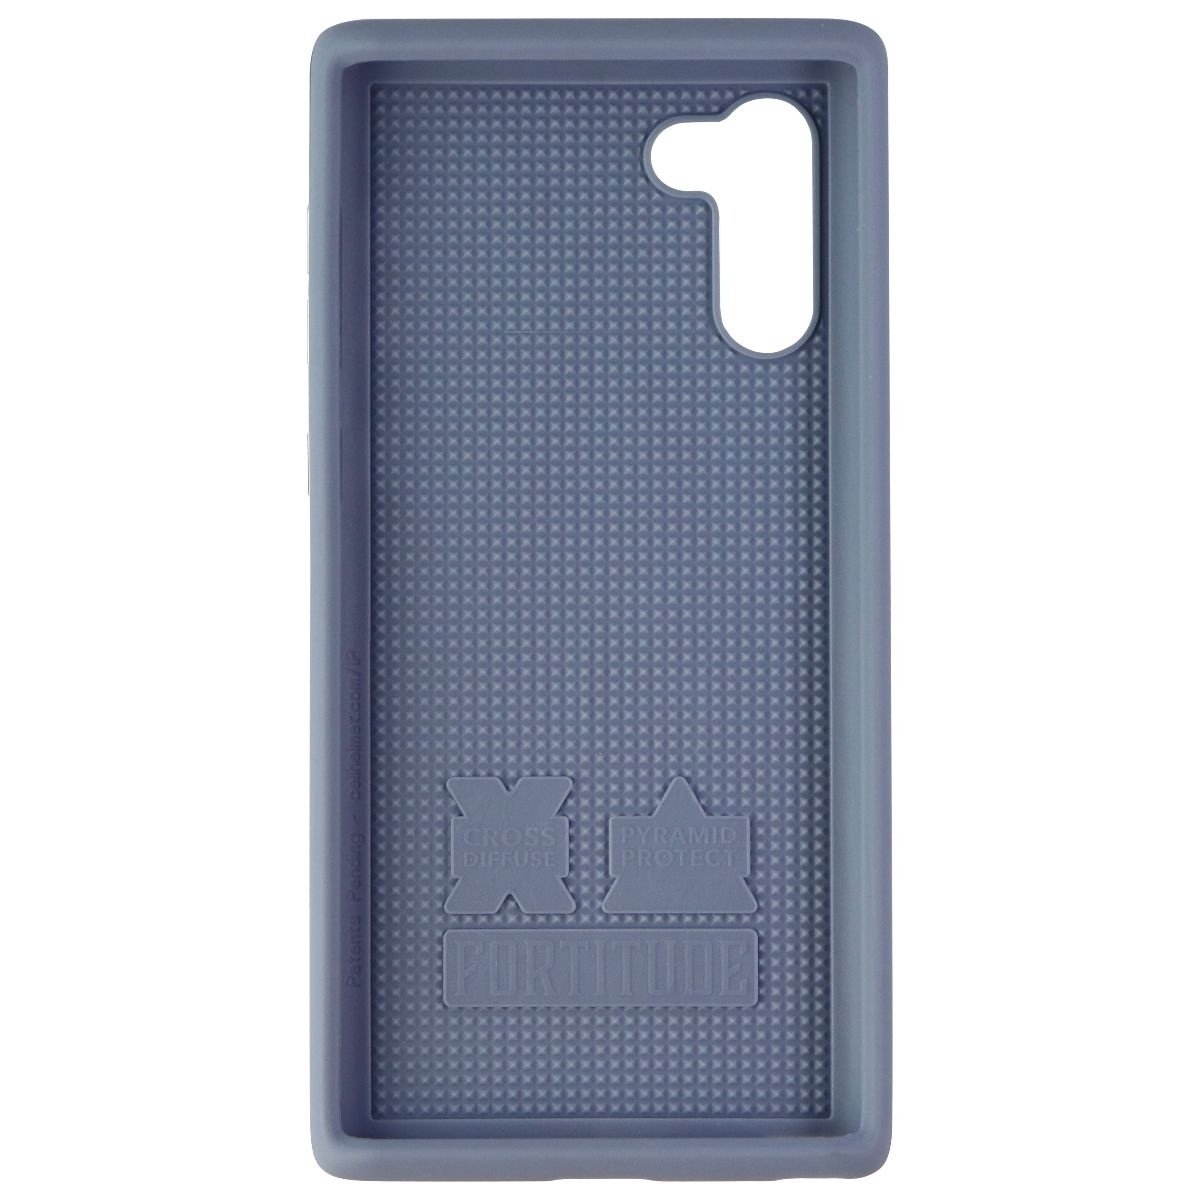 CellHelmet Fortitude Series Case For Samsung Galaxy Note 10 - Slate Blue